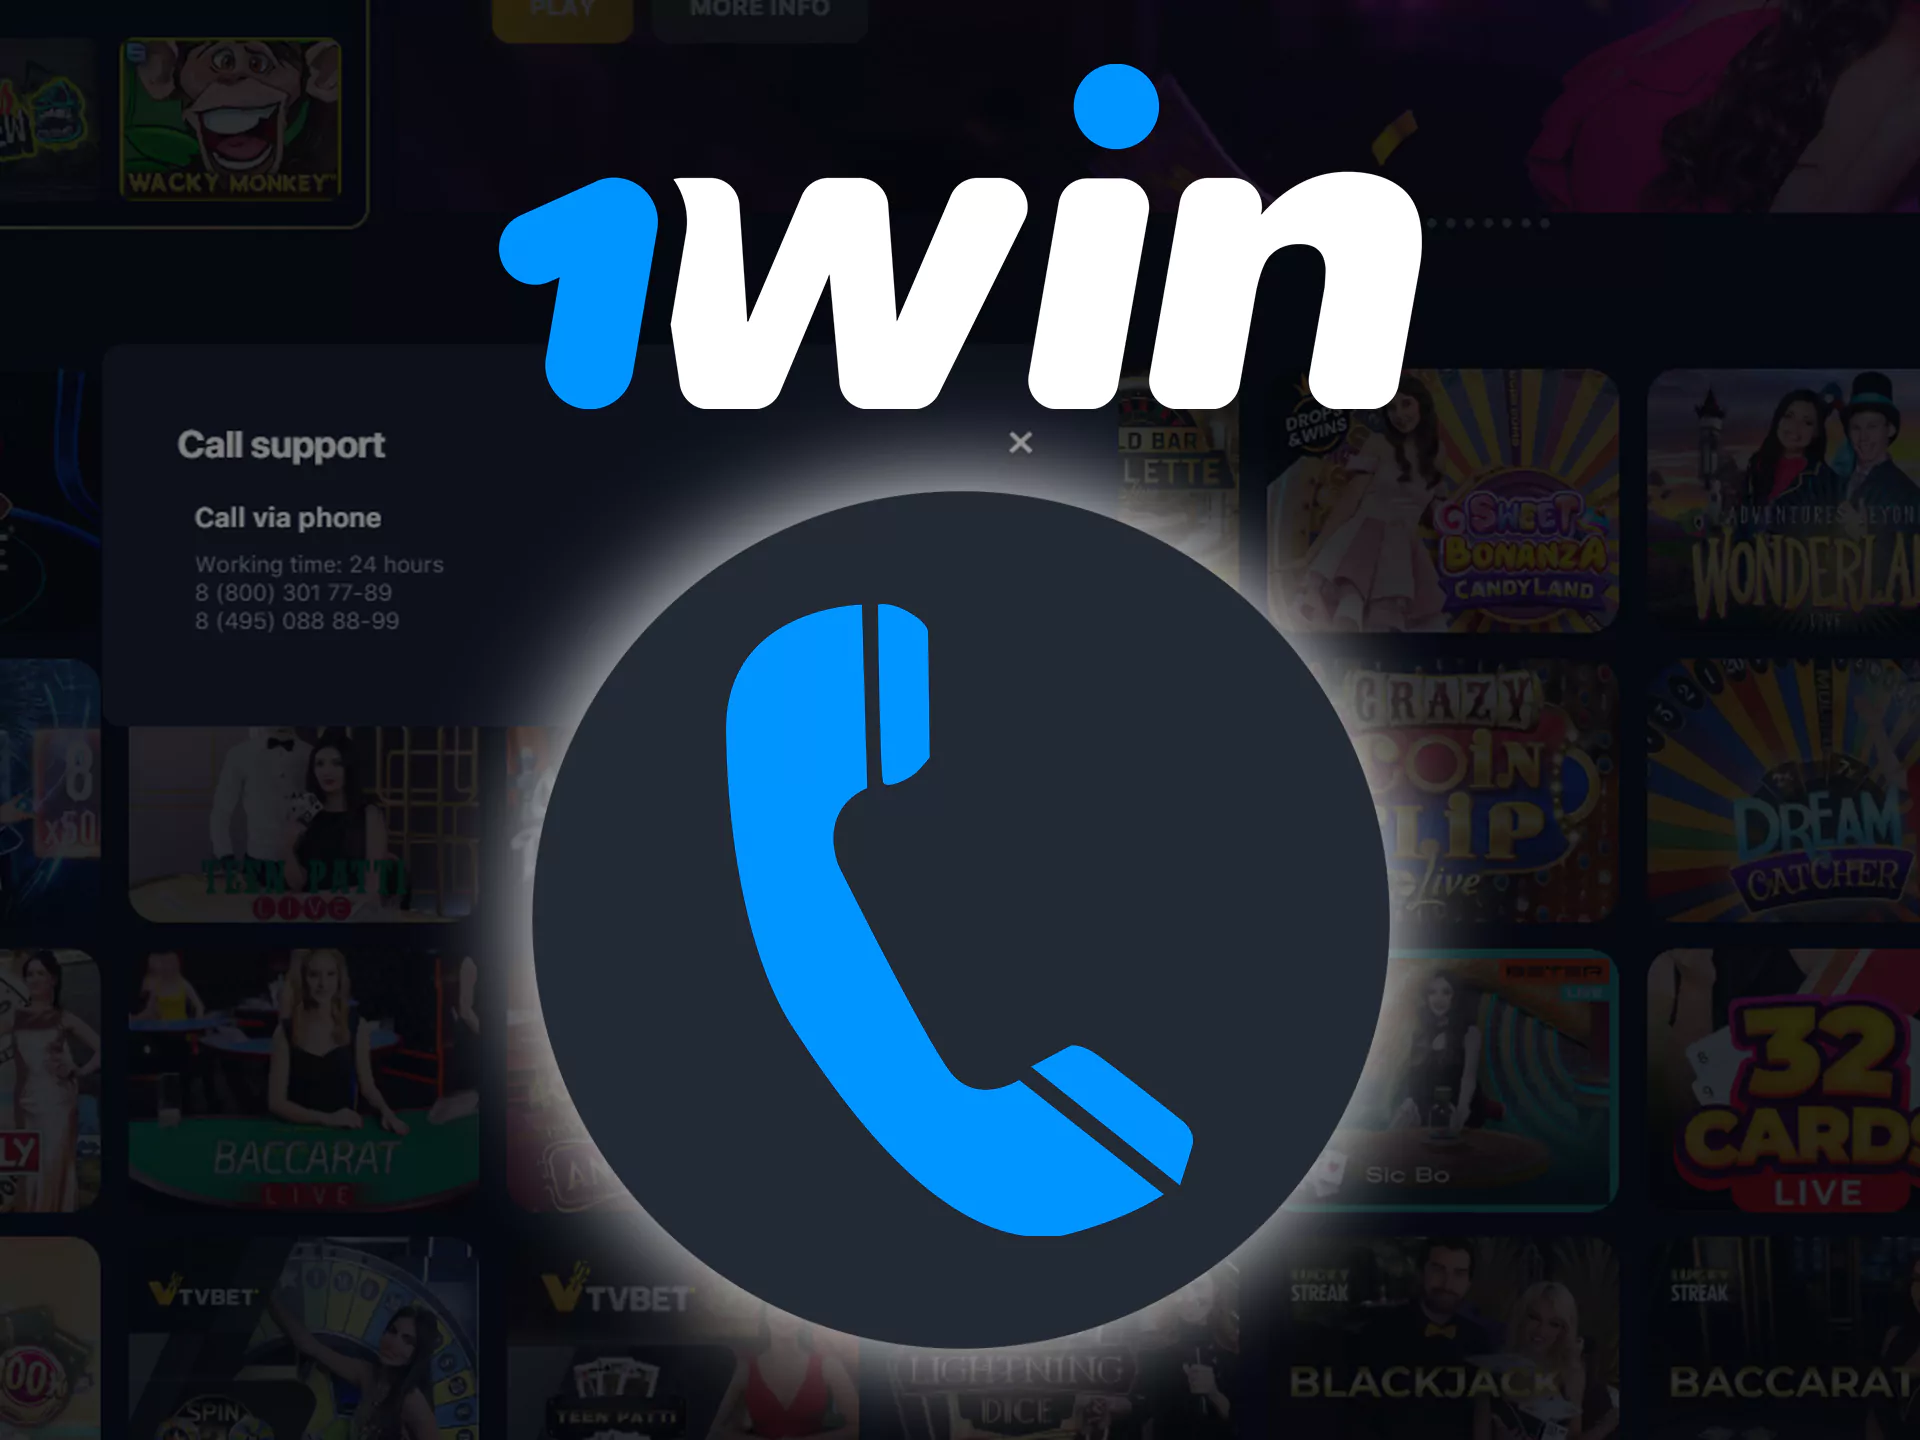 Call 1win support with your phone.